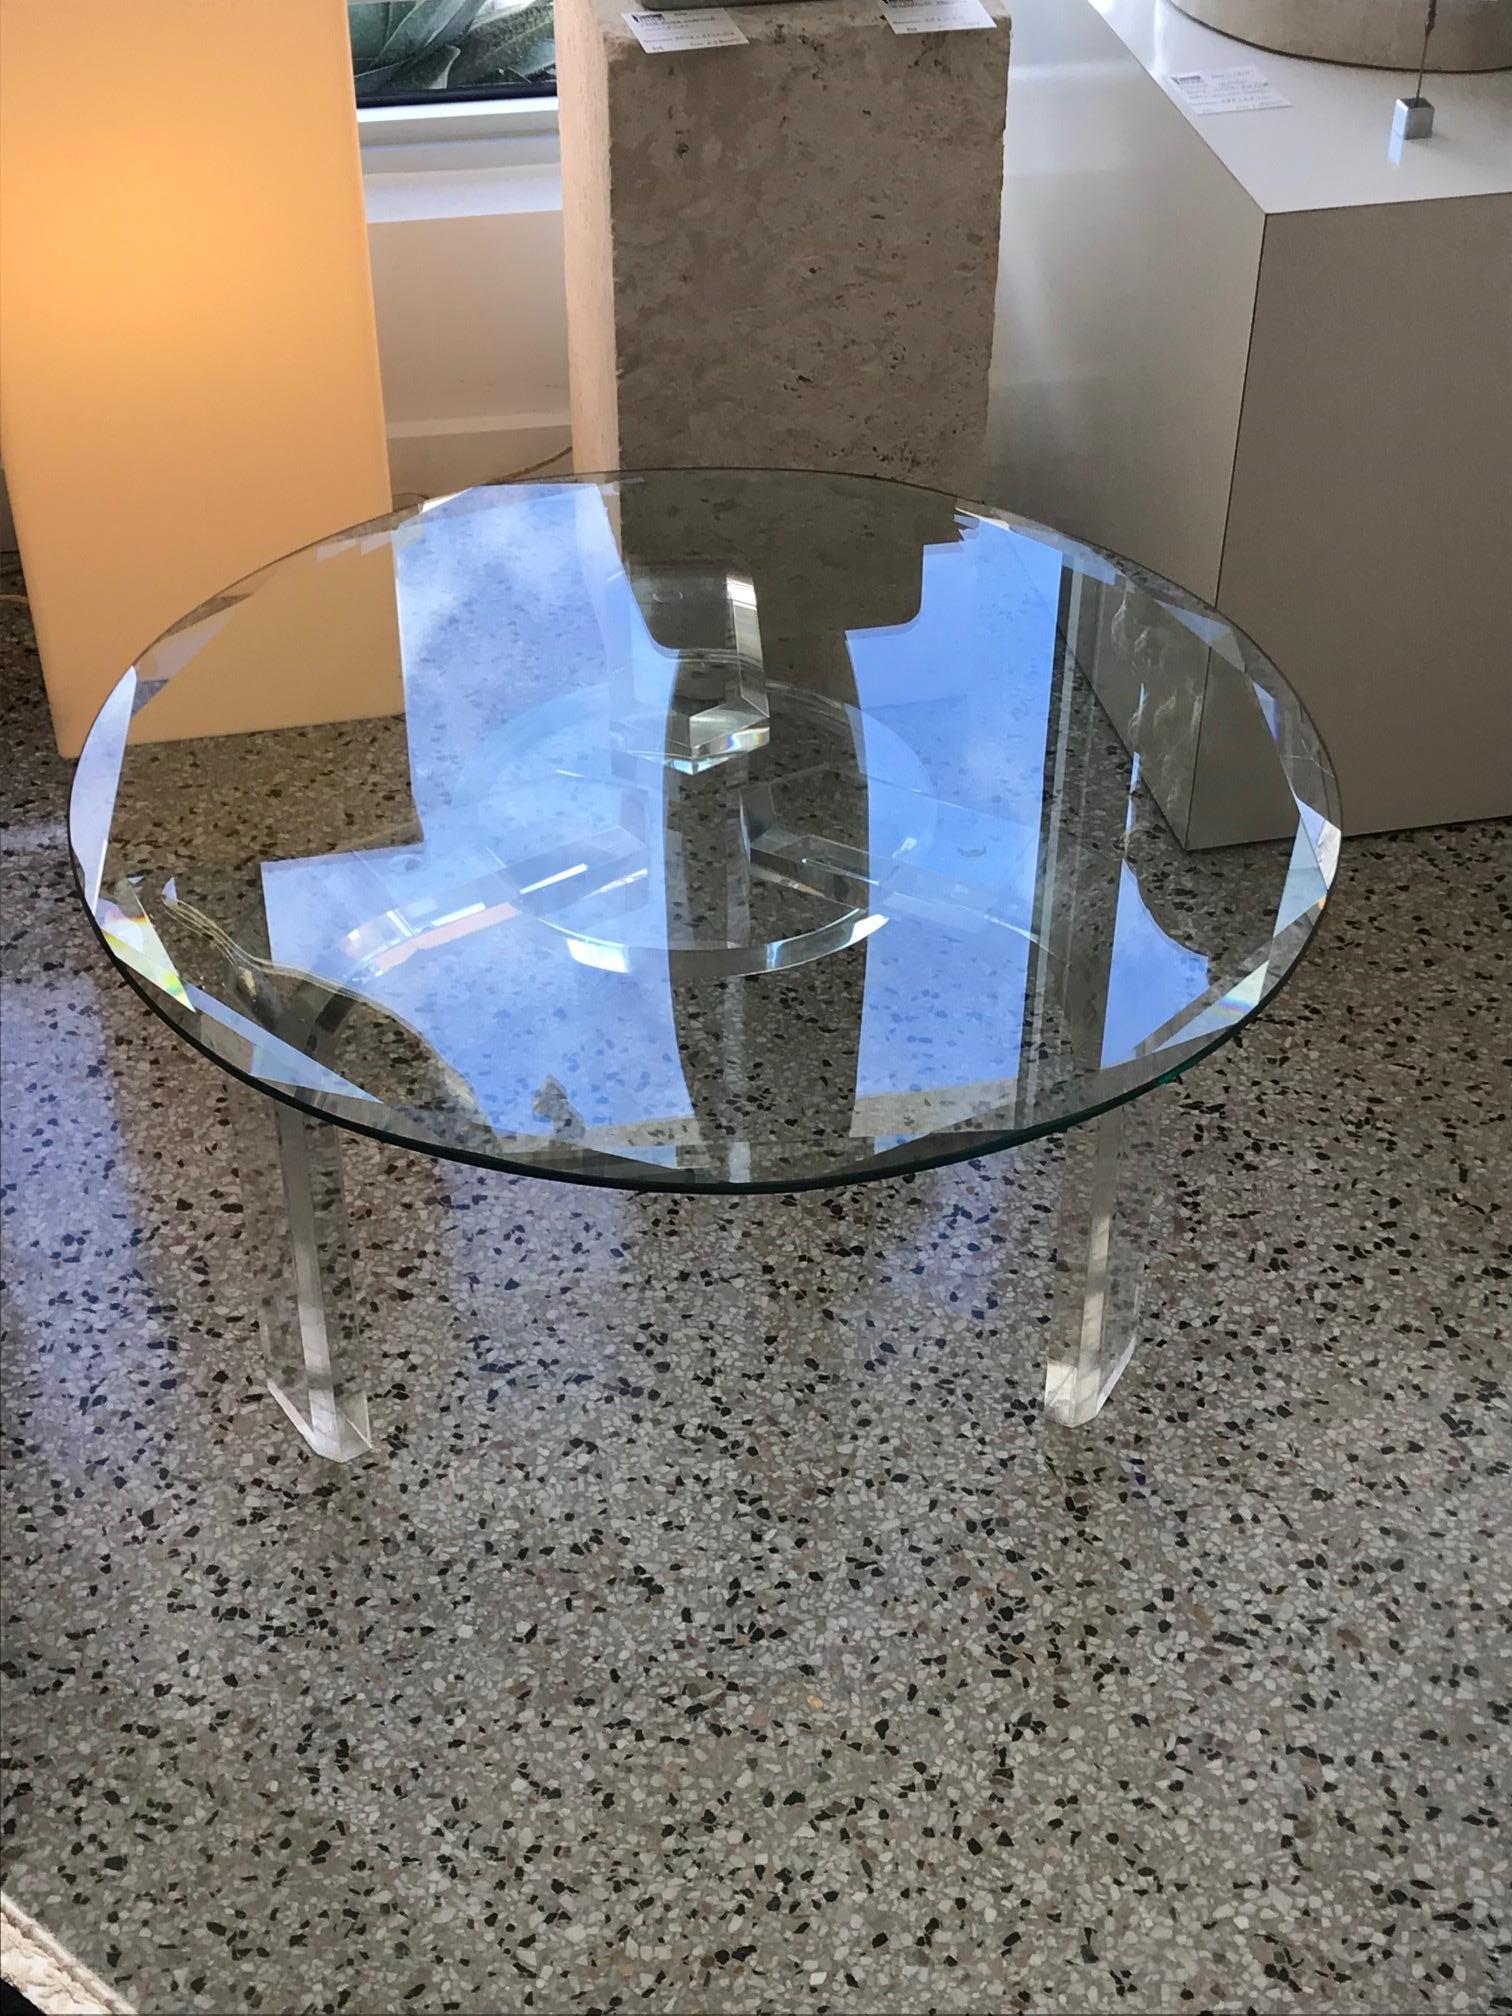 This glamorous (signed) Les Prismatiques round cocktail table was created in the 1970s. It is of the highest quality Lucite and 3/4